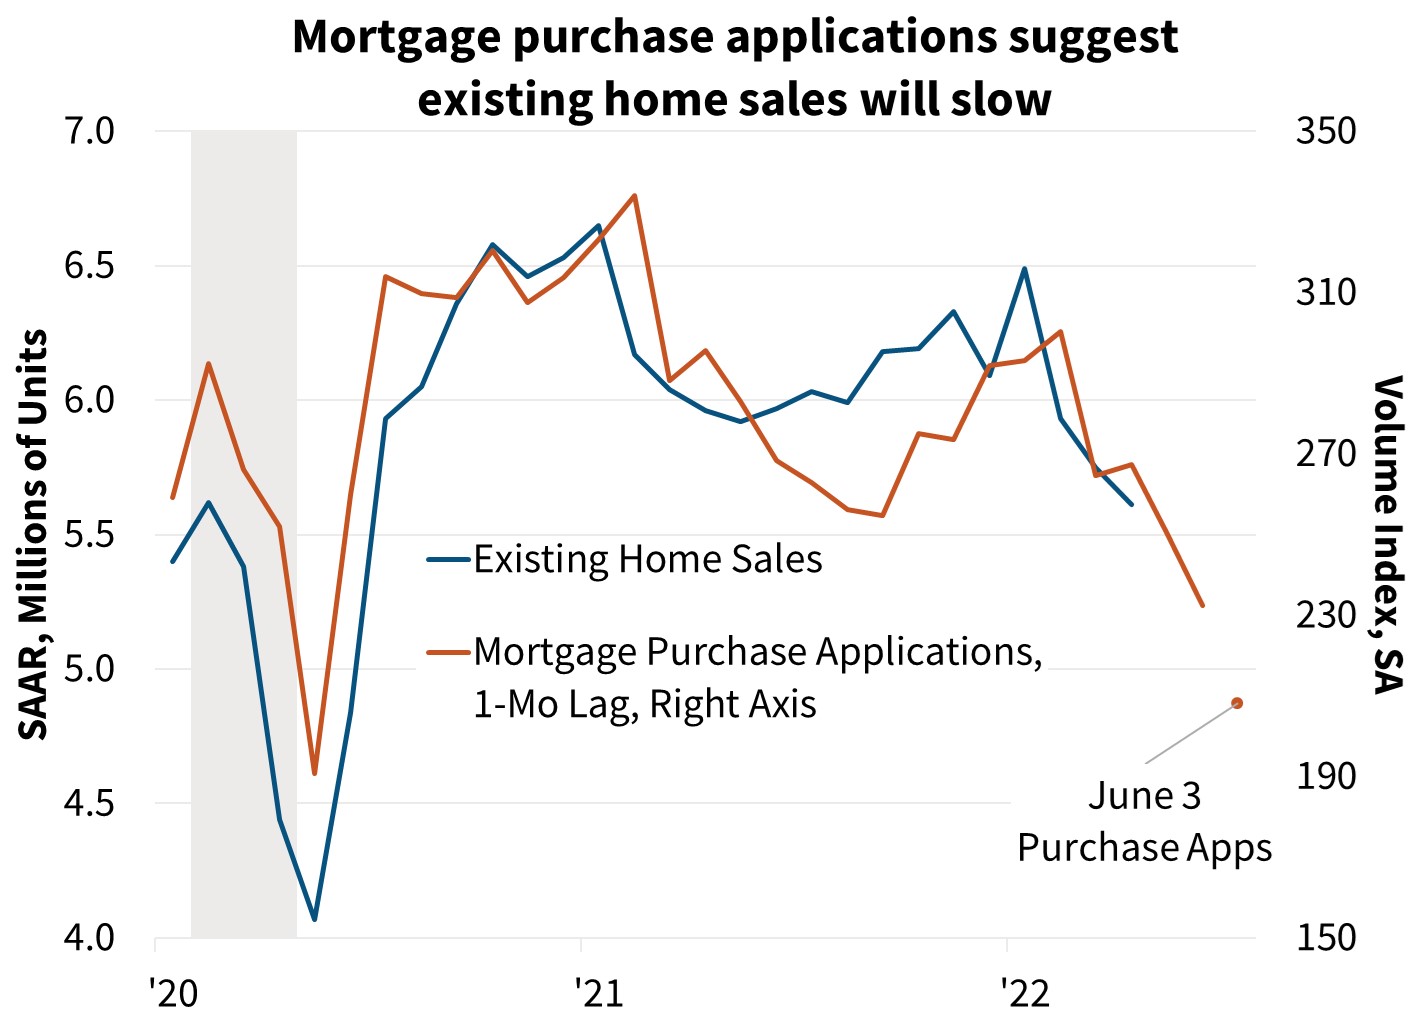  Mortgage purchase applications suggest existing home sales will slow 